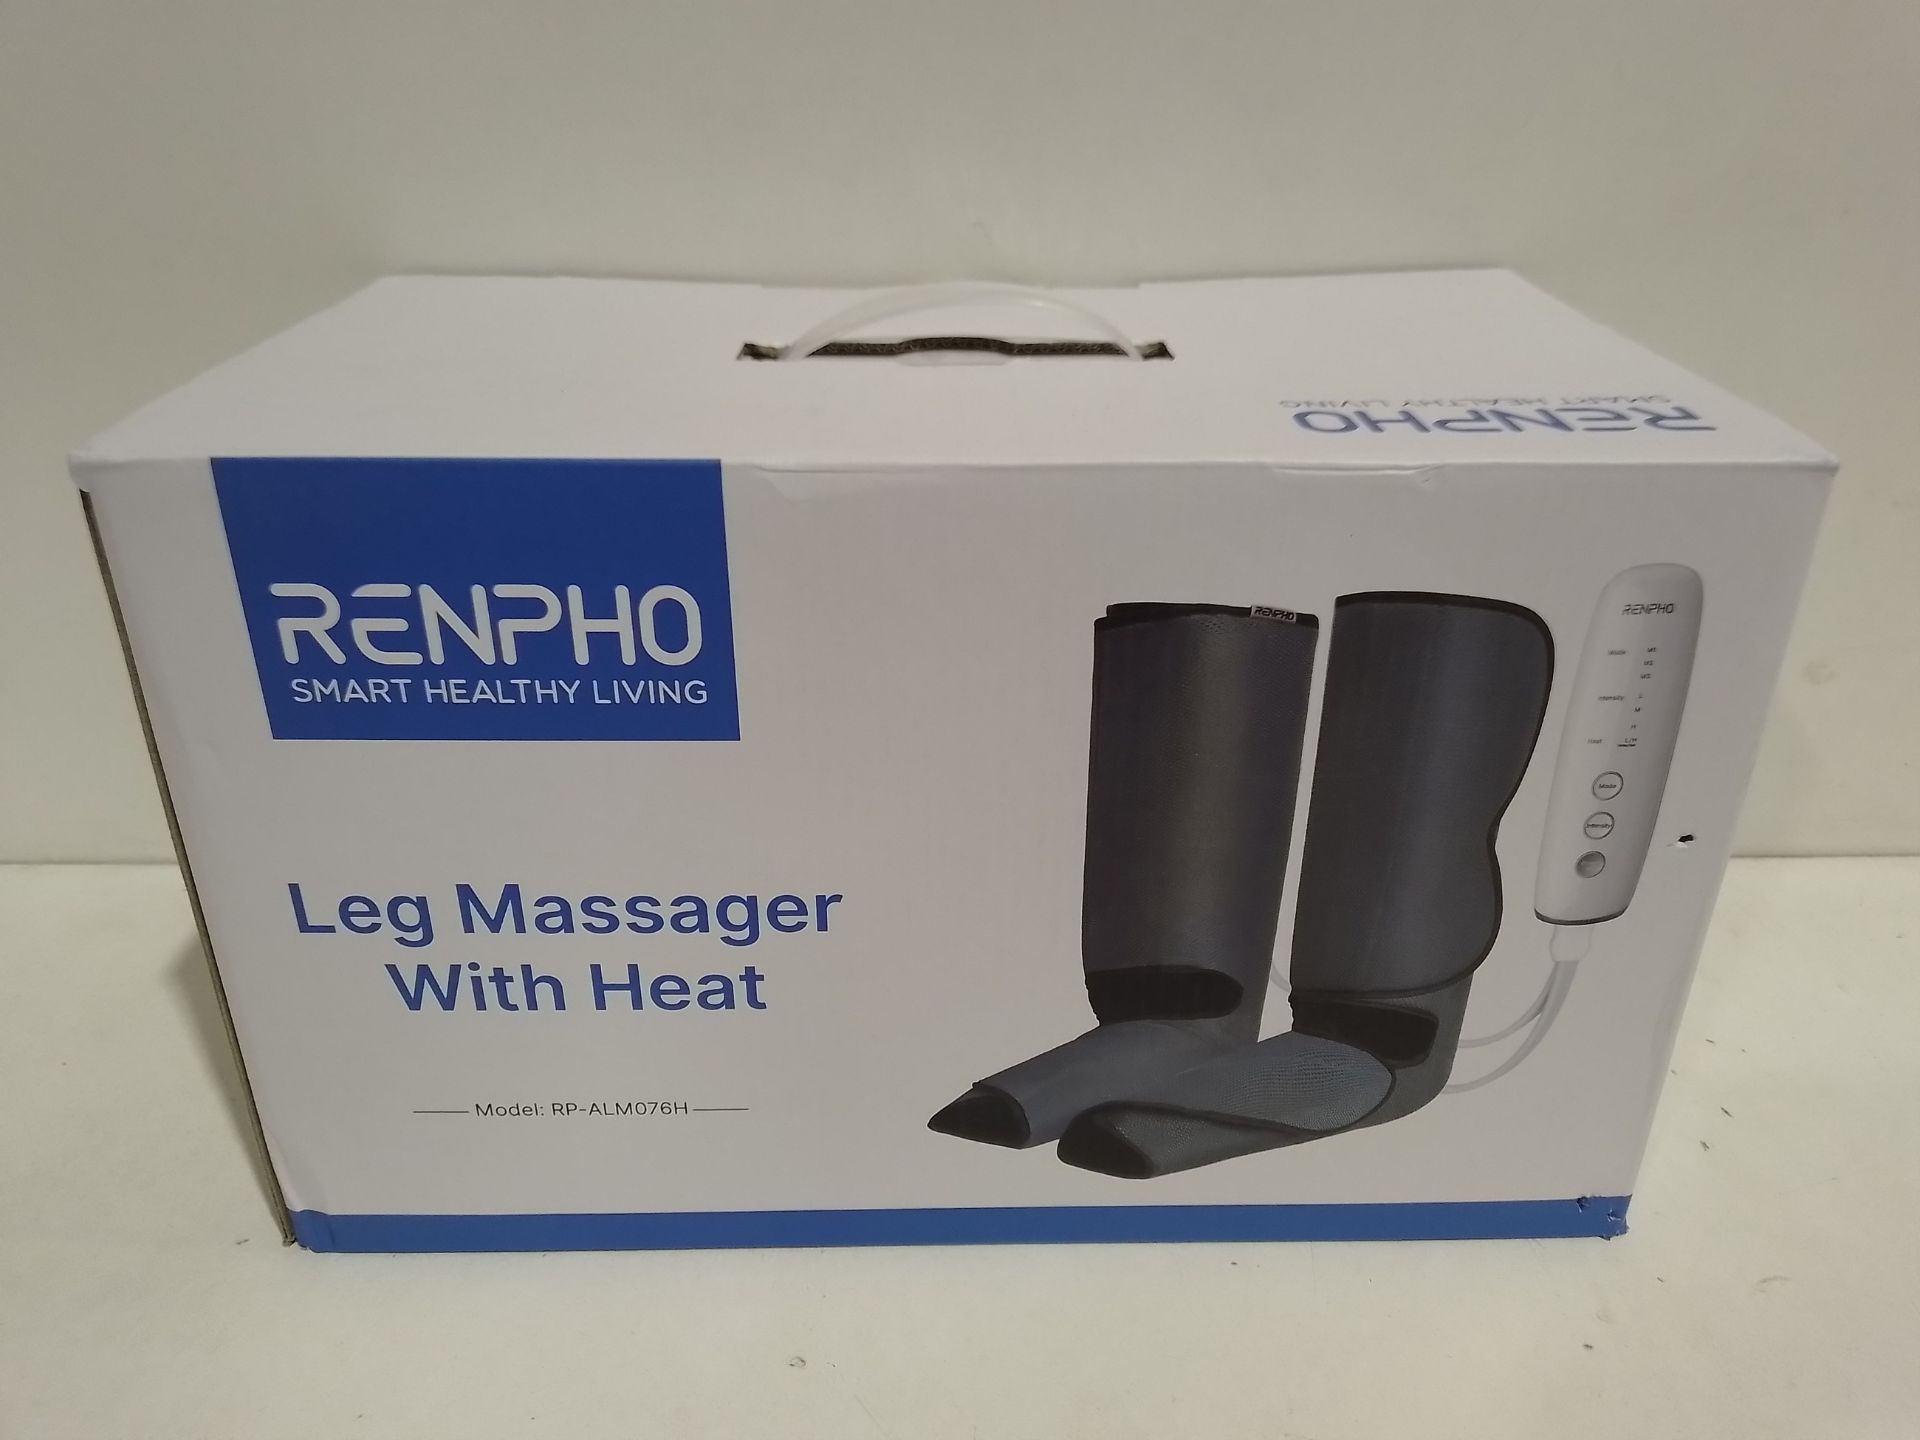 RRP £61.40 RENPHO Leg Massager with Heat - Image 2 of 2